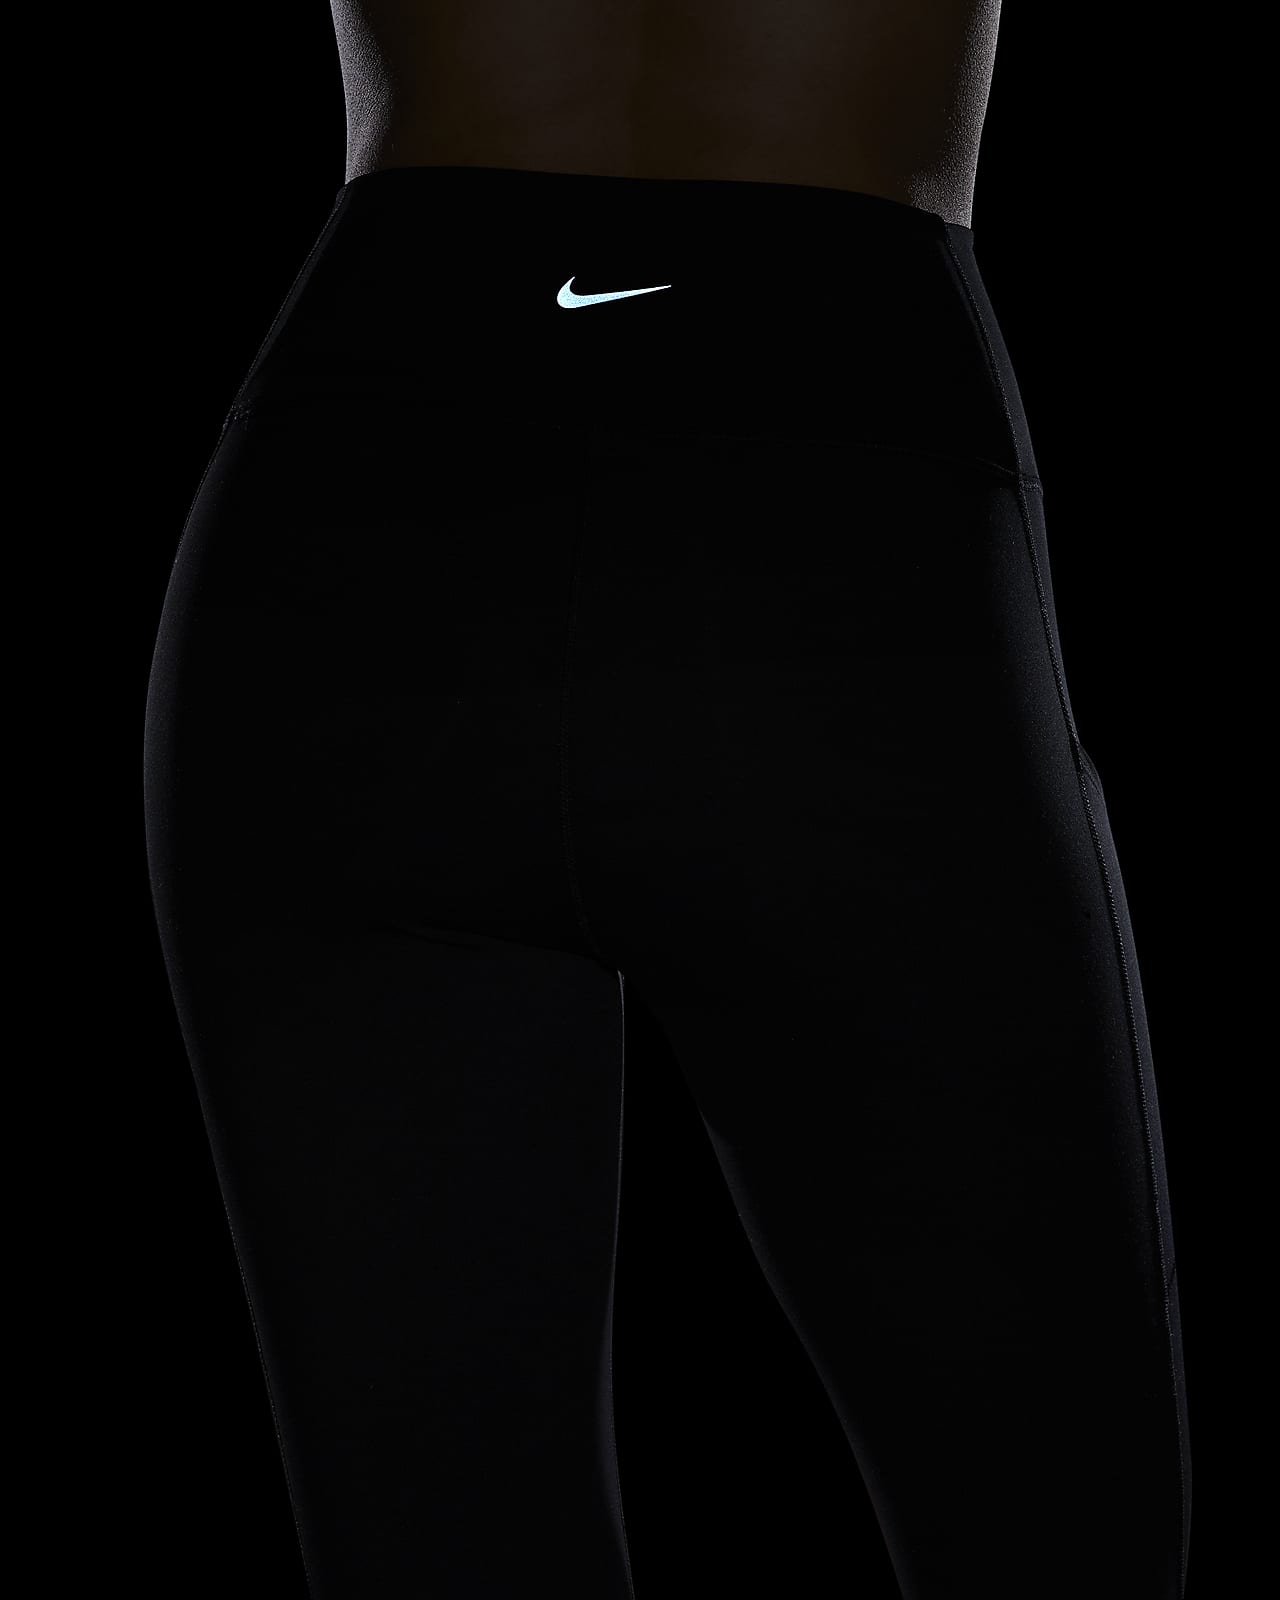 Victory Leggings - Forest Green